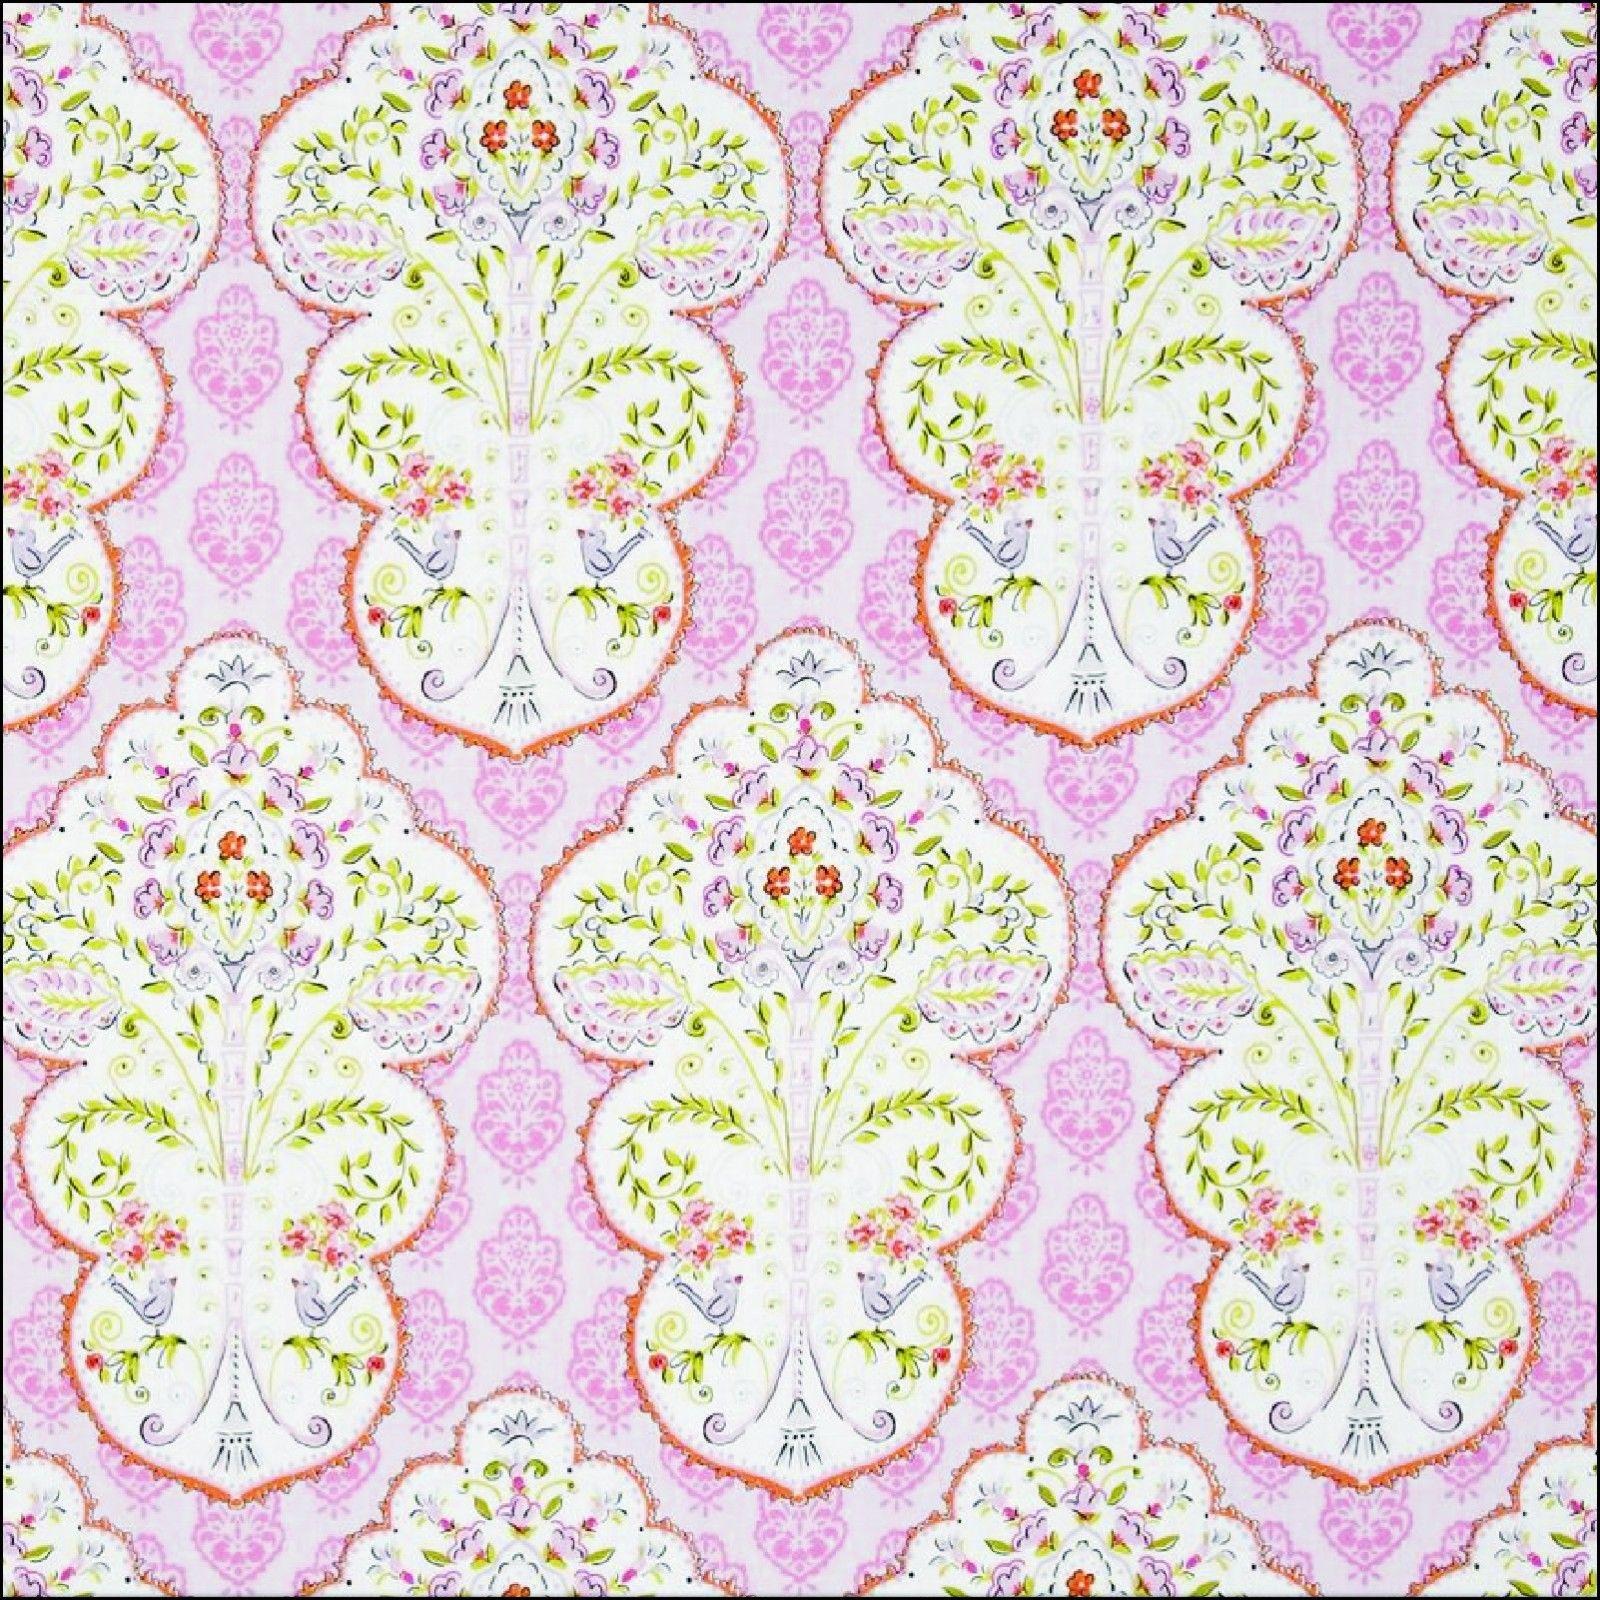 Cotton Fabric | Floral Panels on Pink Cotton | More Sewing